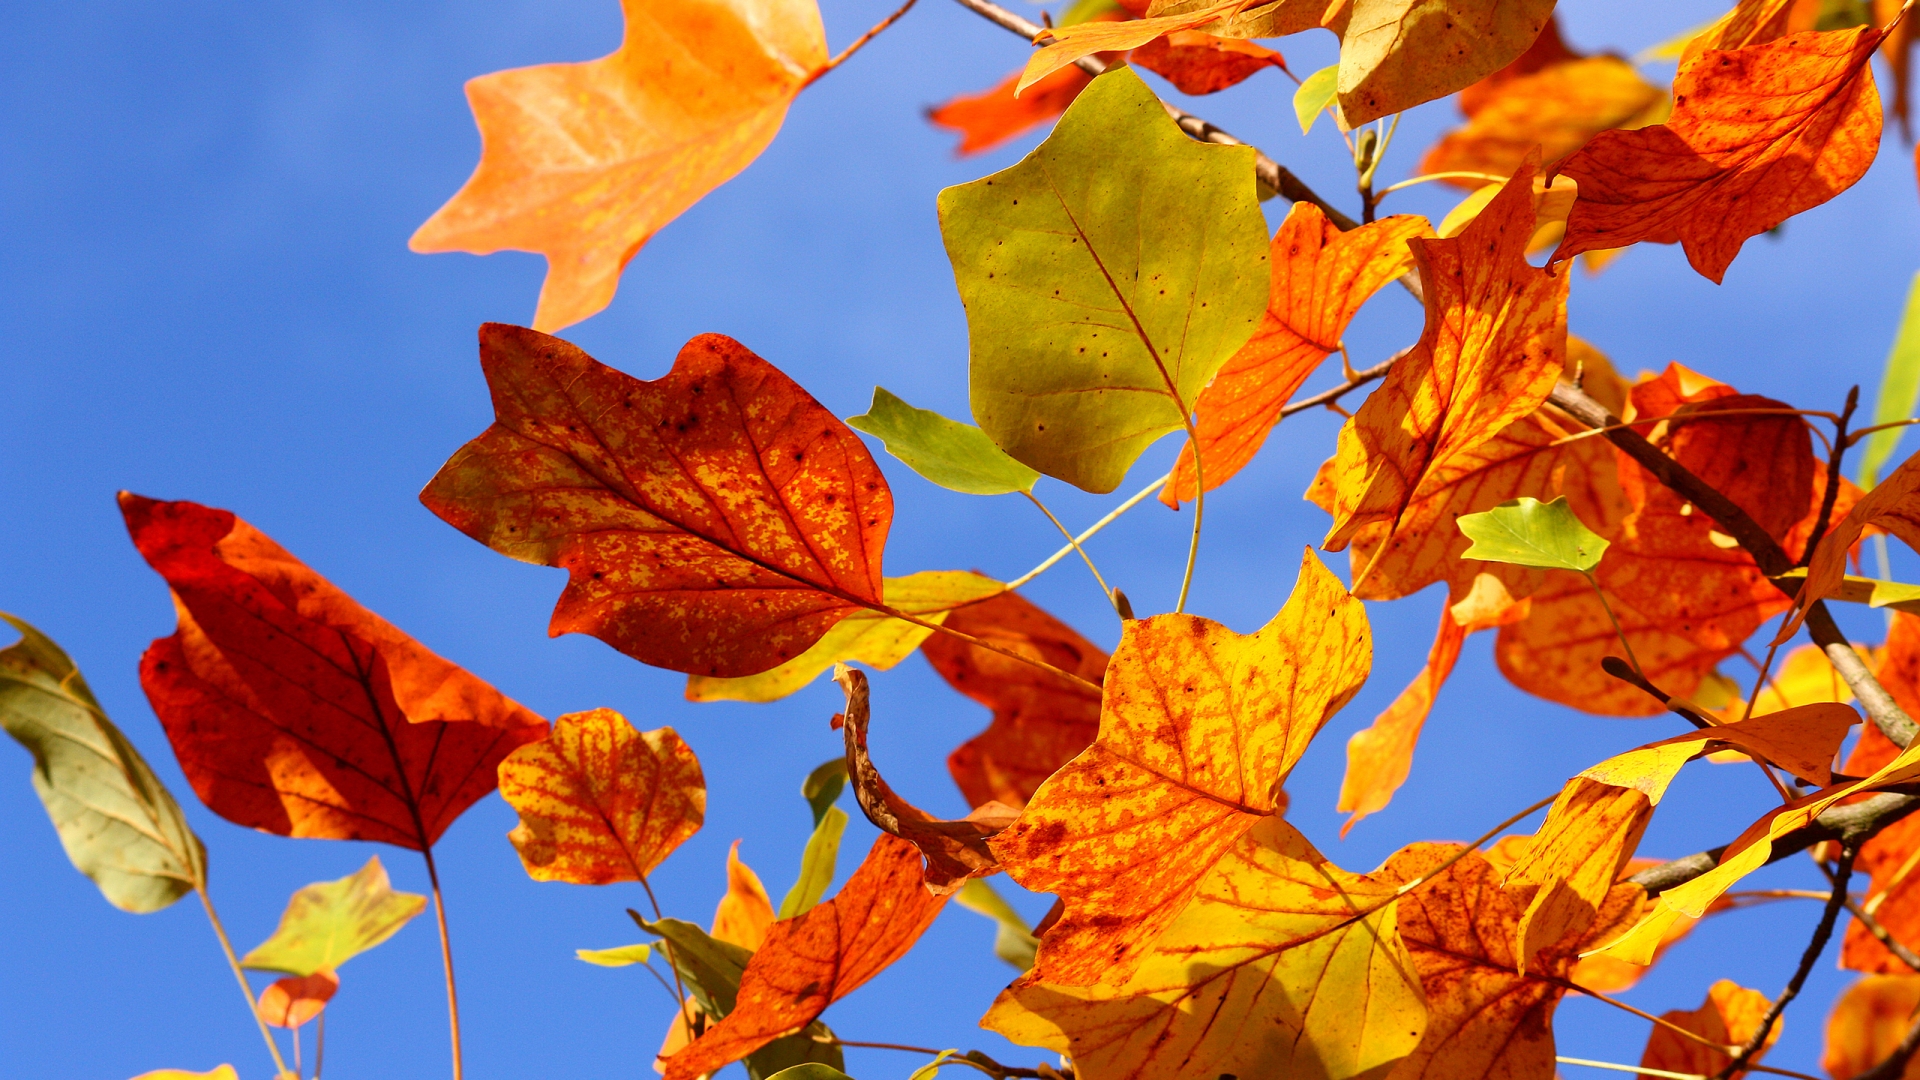 Autumn Colorful Leaves for 1920 x 1080 HDTV 1080p resolution